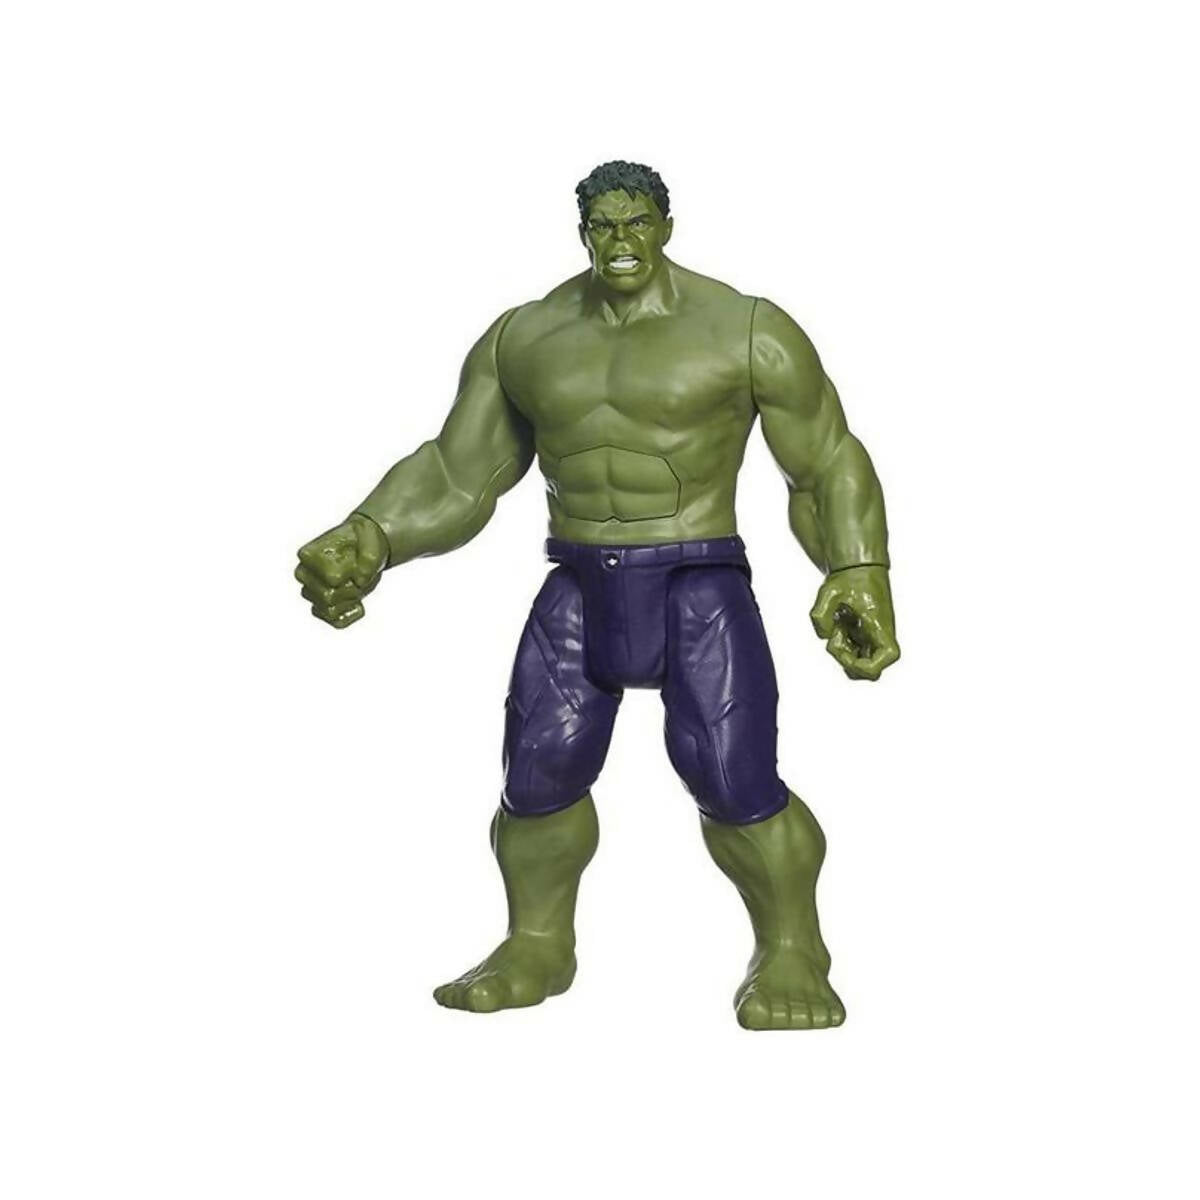 Planet X - Incredible Hulk Action Figure - Avengers Series - 8 Inches